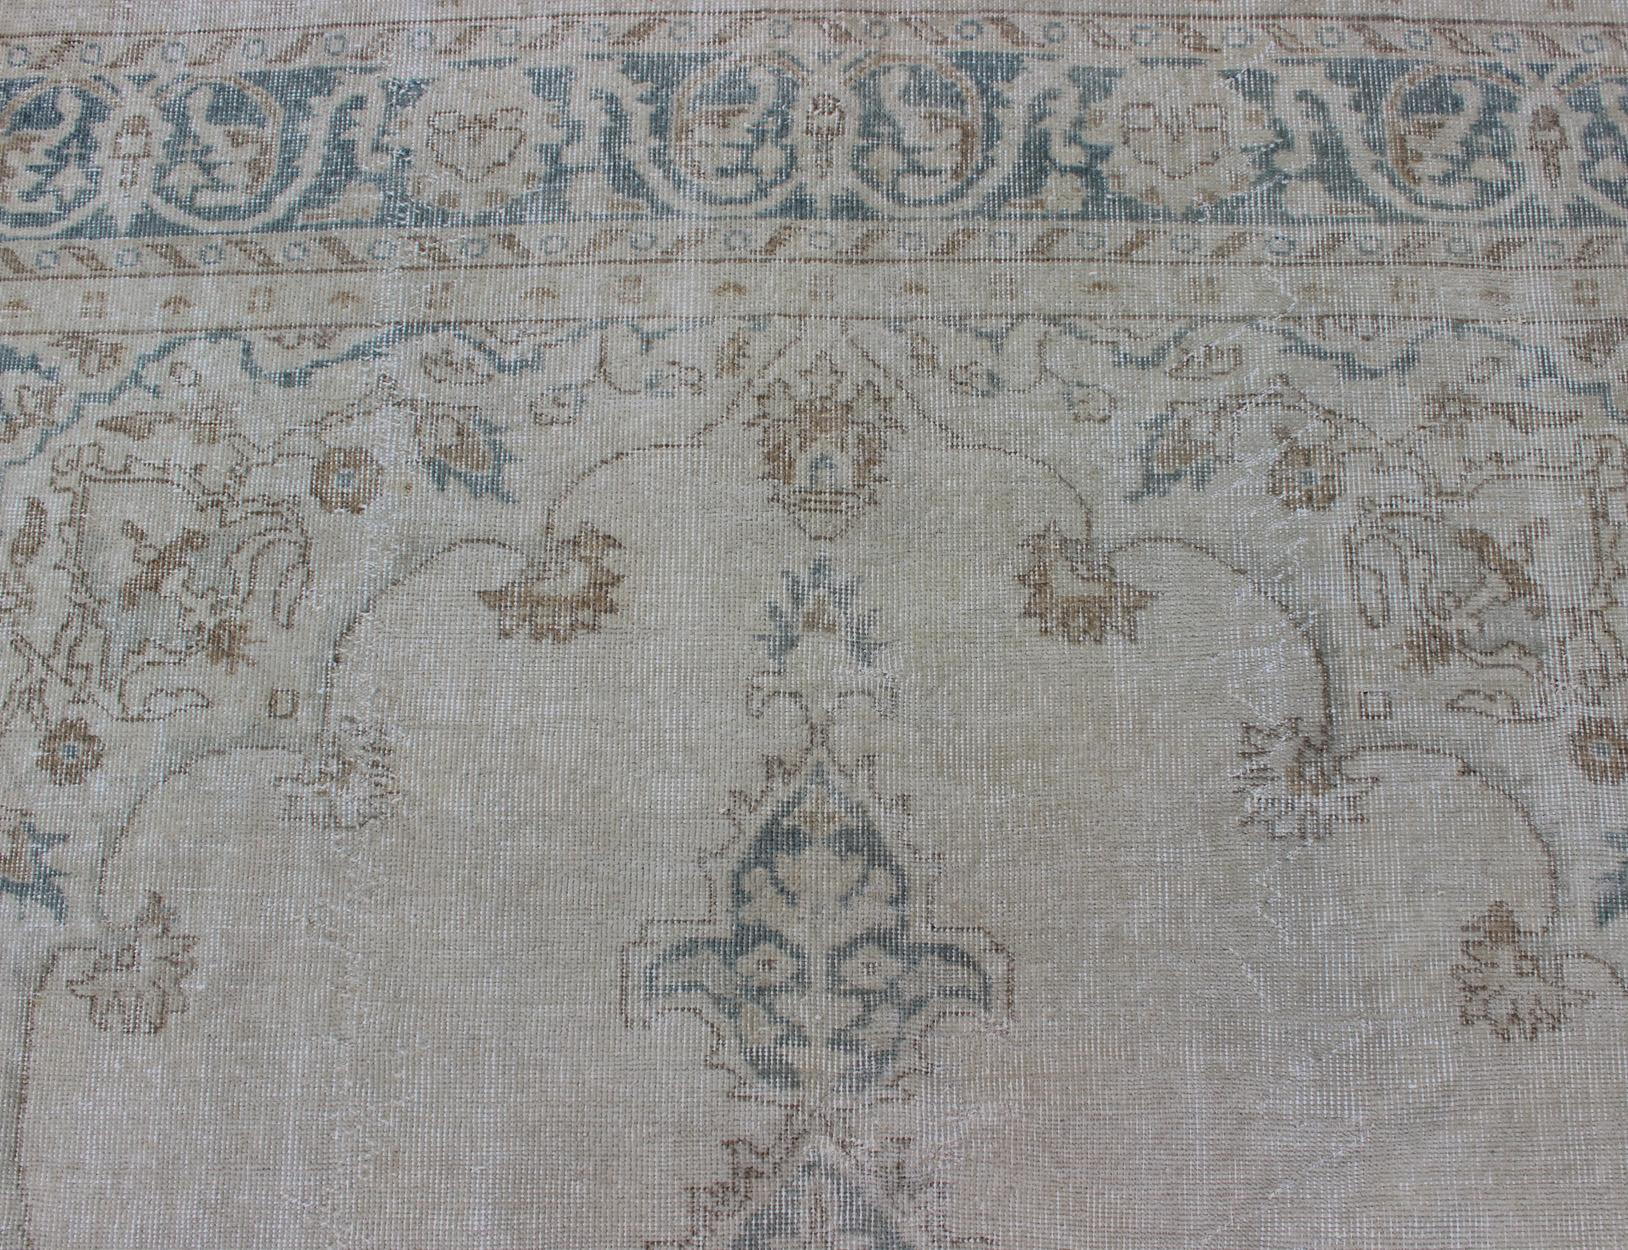 Medallion Distressed Oushak Turkey in Cream, Blue Tones, brown and Teal Blue For Sale 3